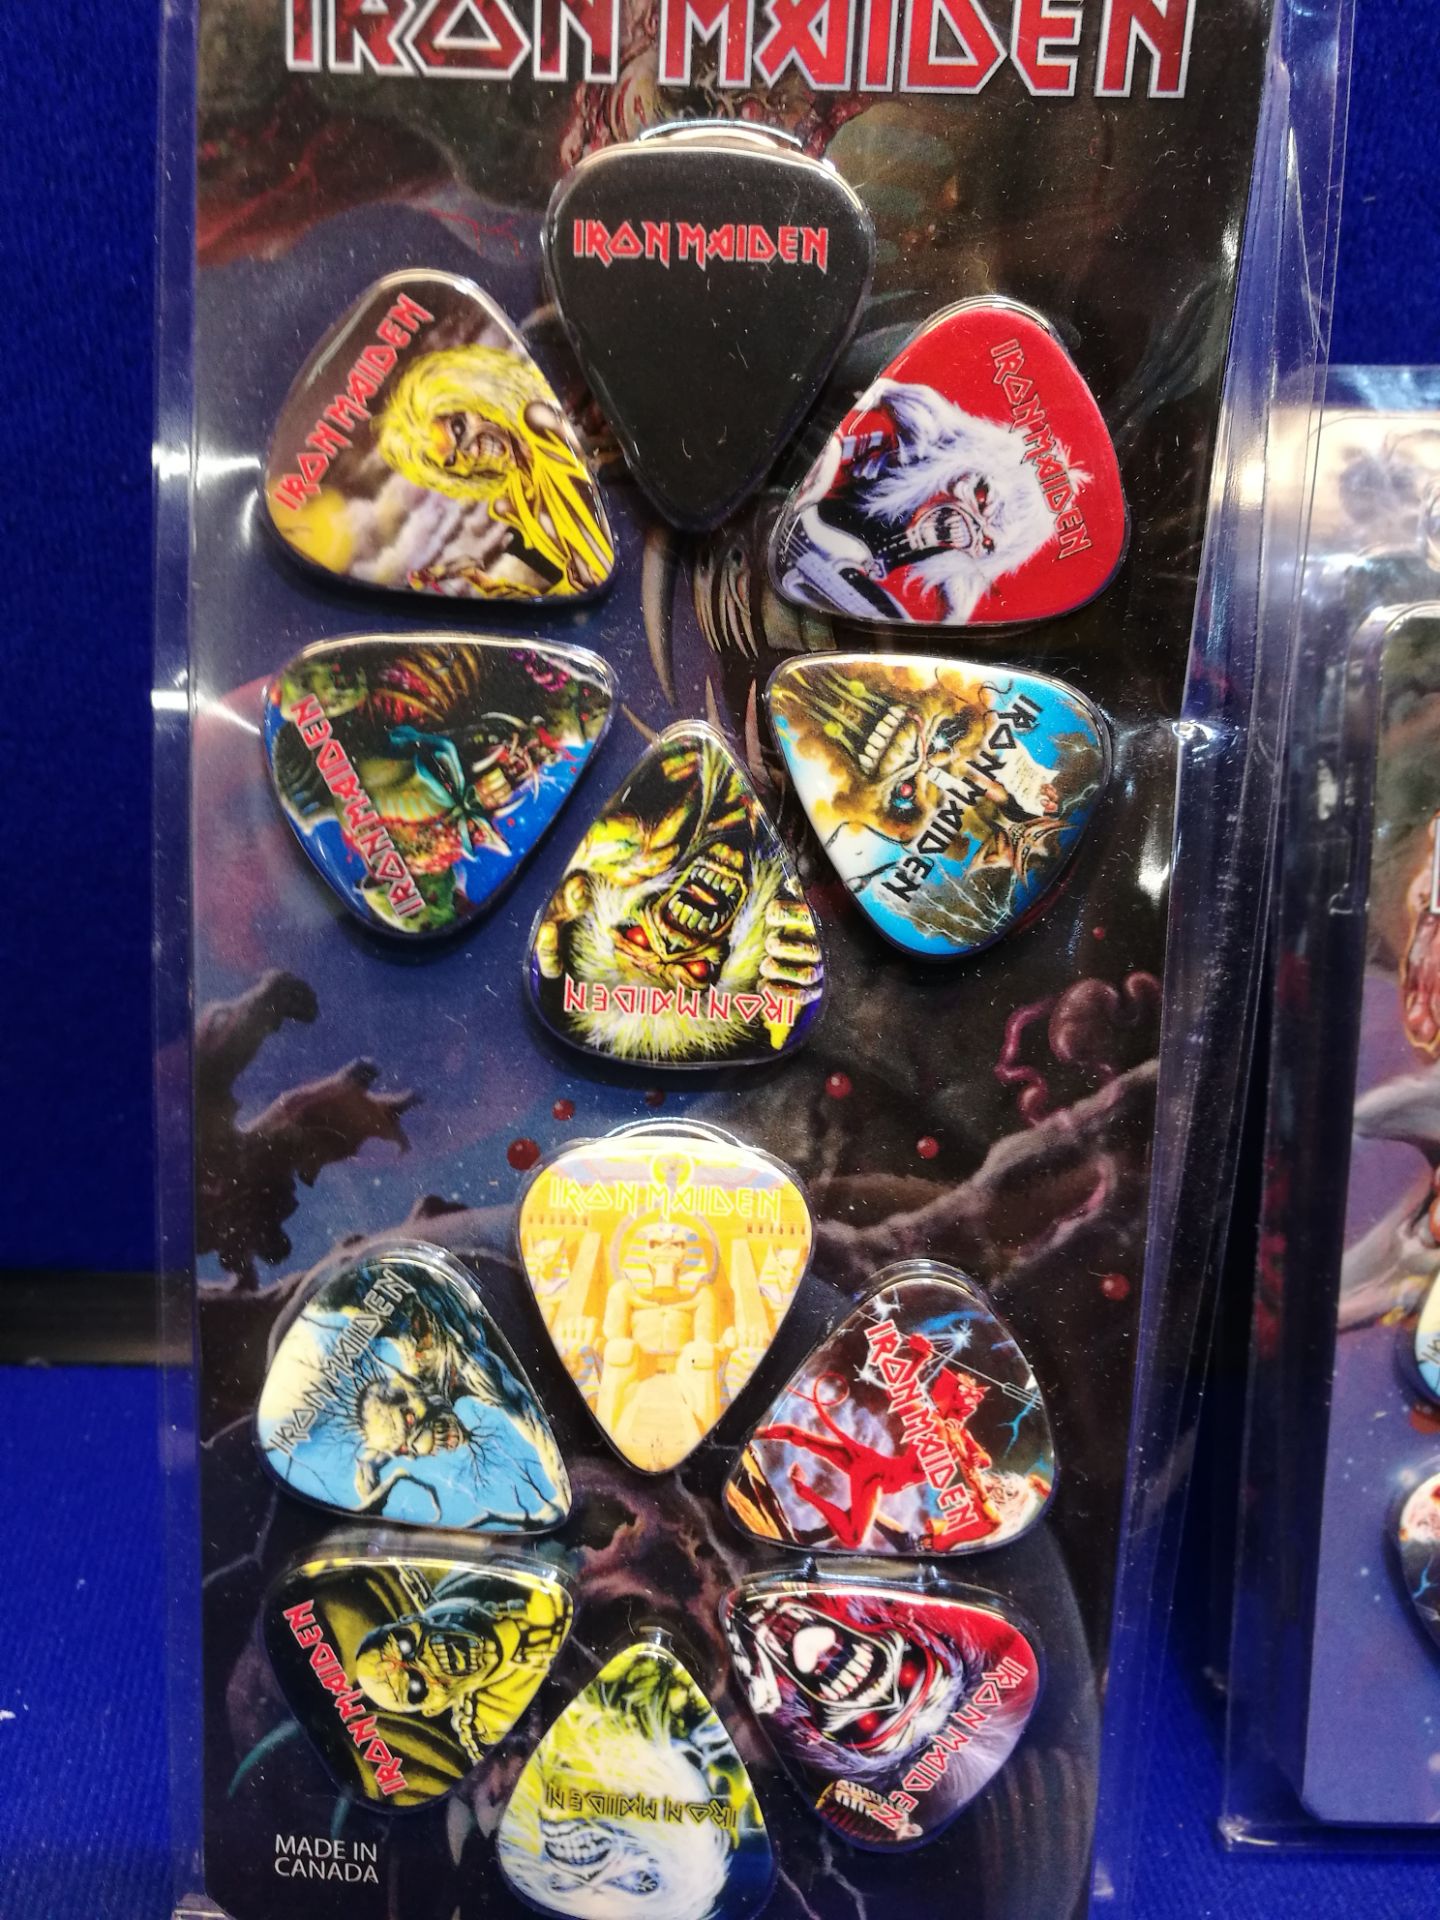 Assortment of Iron Maiden Themed Pick Packs - 2 Variants, 7 Packs Total - Image 2 of 3